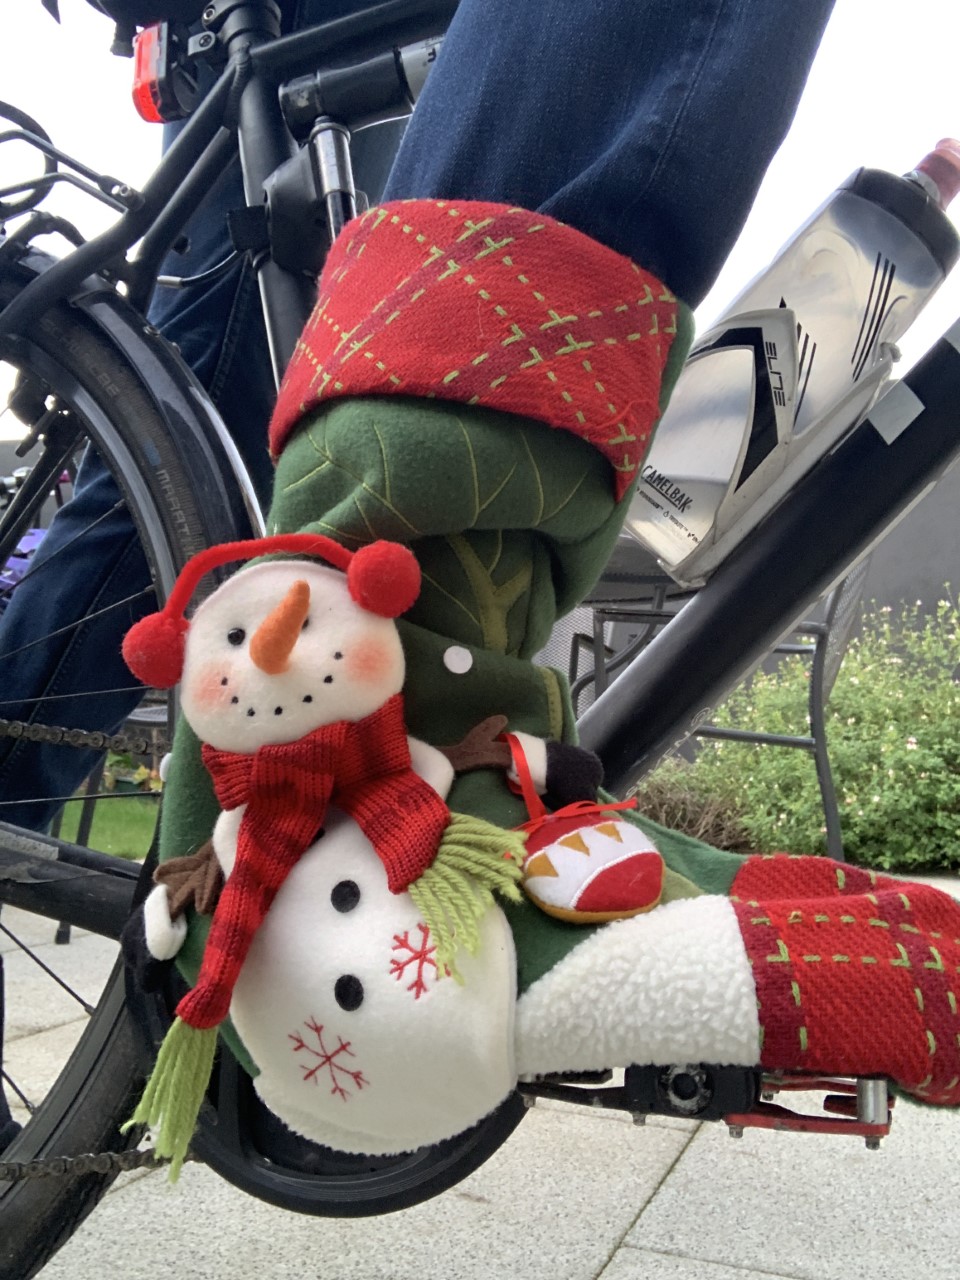 Solo Ride December 13th - 9th Day of Festive Rides!